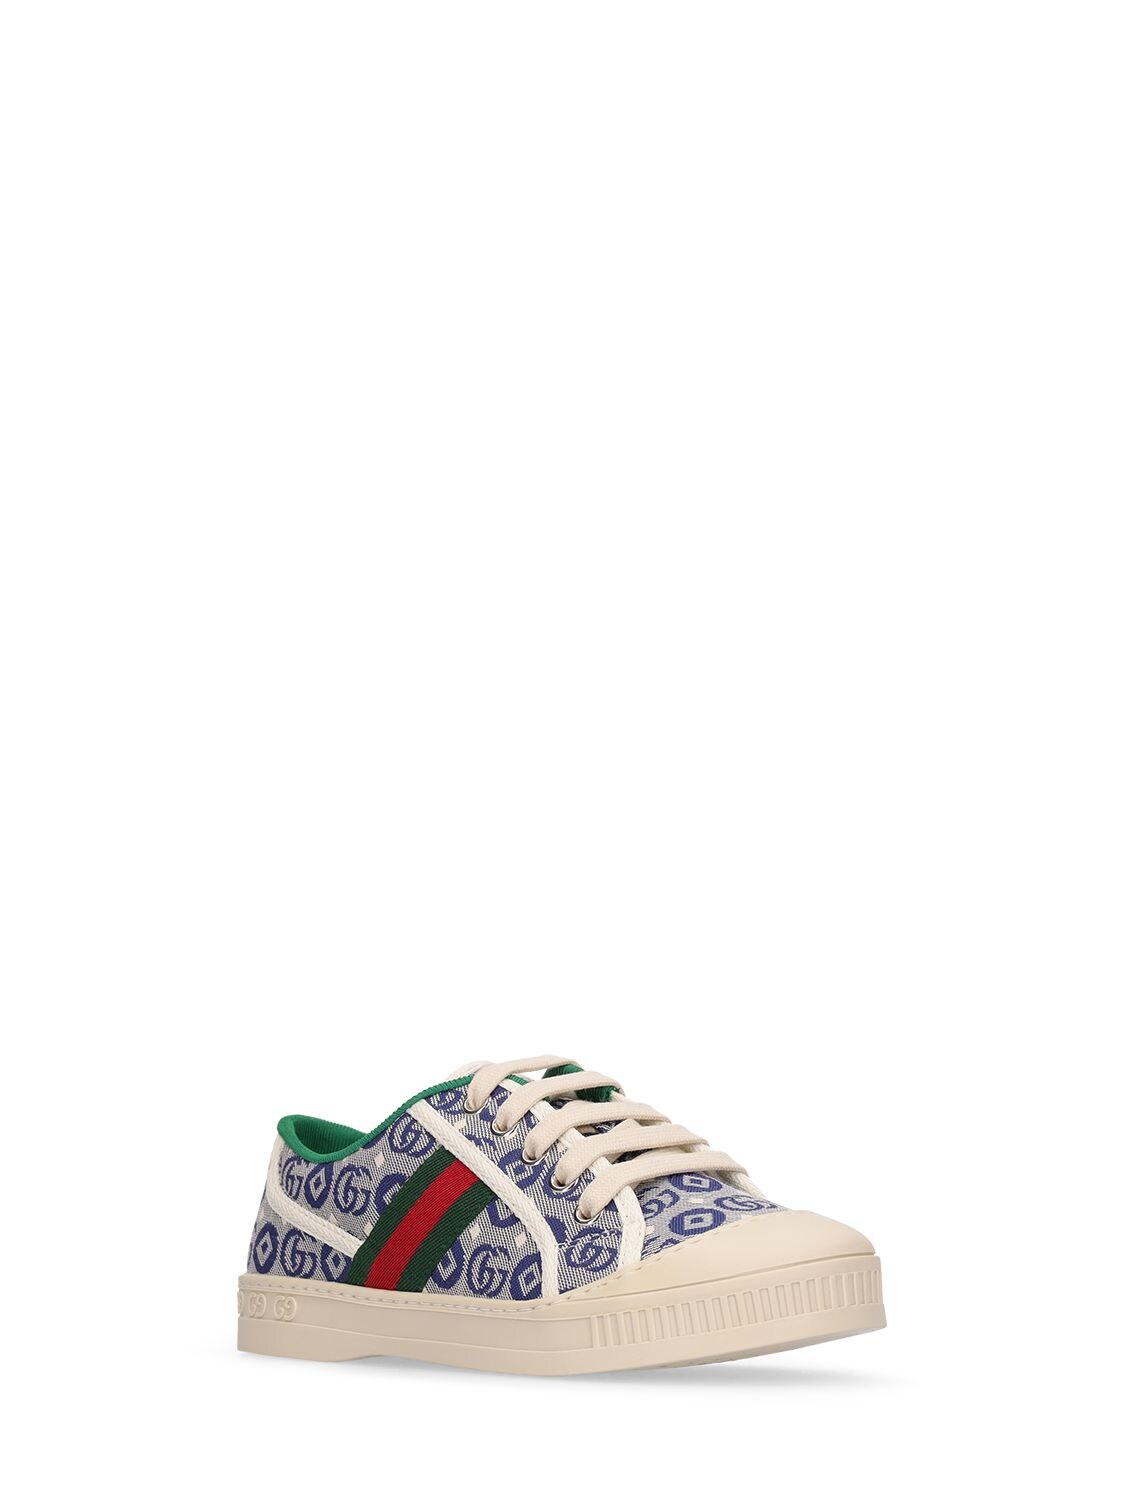 Shop Gucci Tennis 1977 Label Sneakers In Blue,white